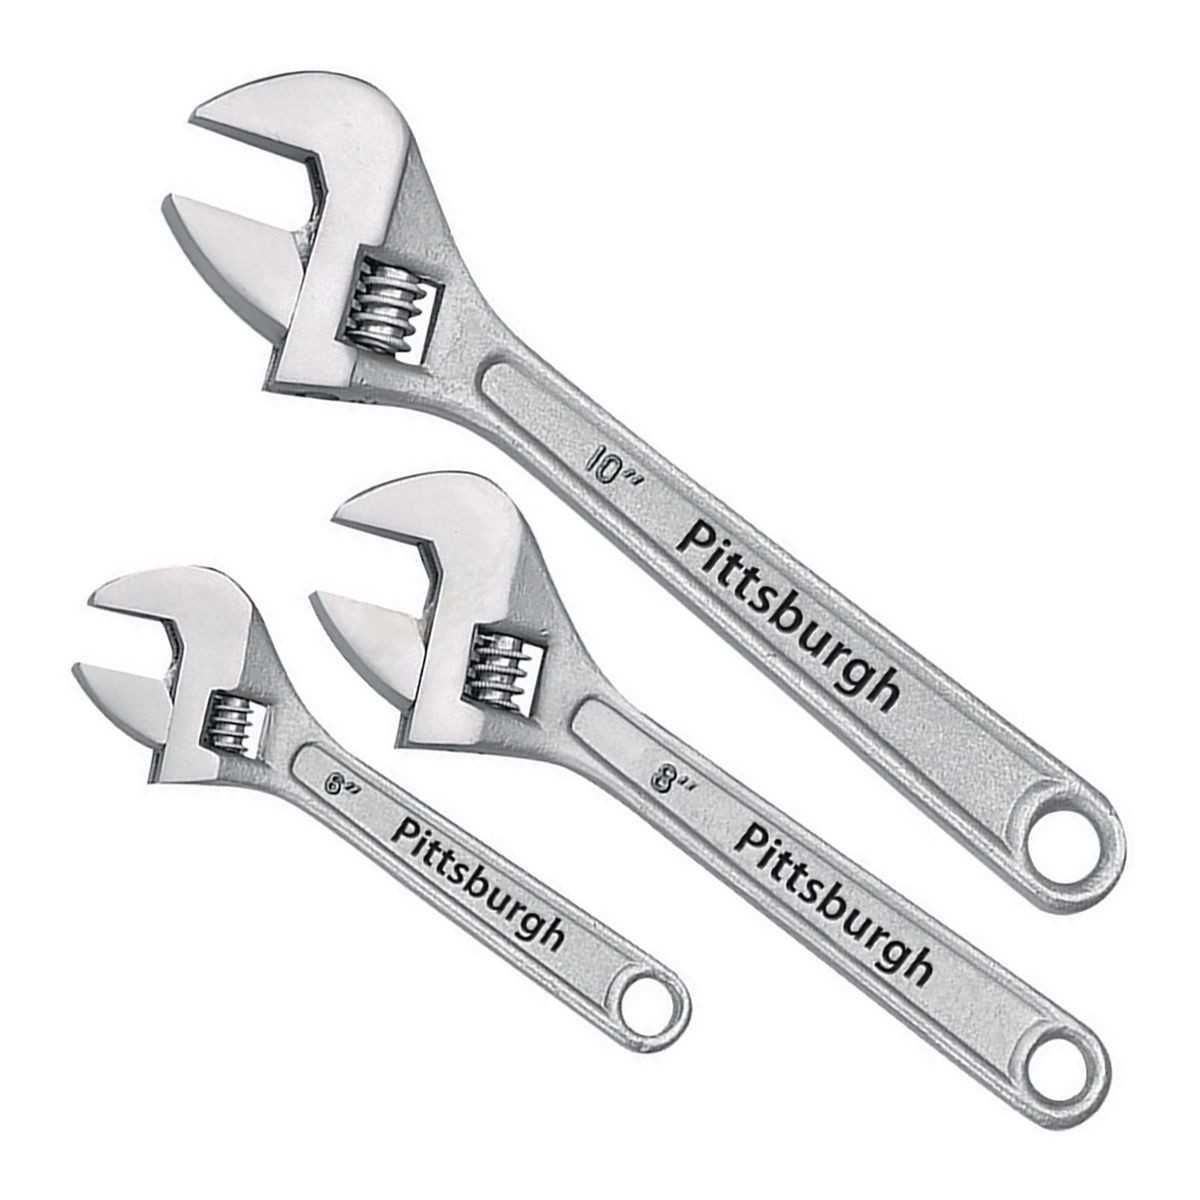 PITTSBURGH 3 Pc Adjustable Wrench Set - Item 47099 / 60691 / 63716 / 69543